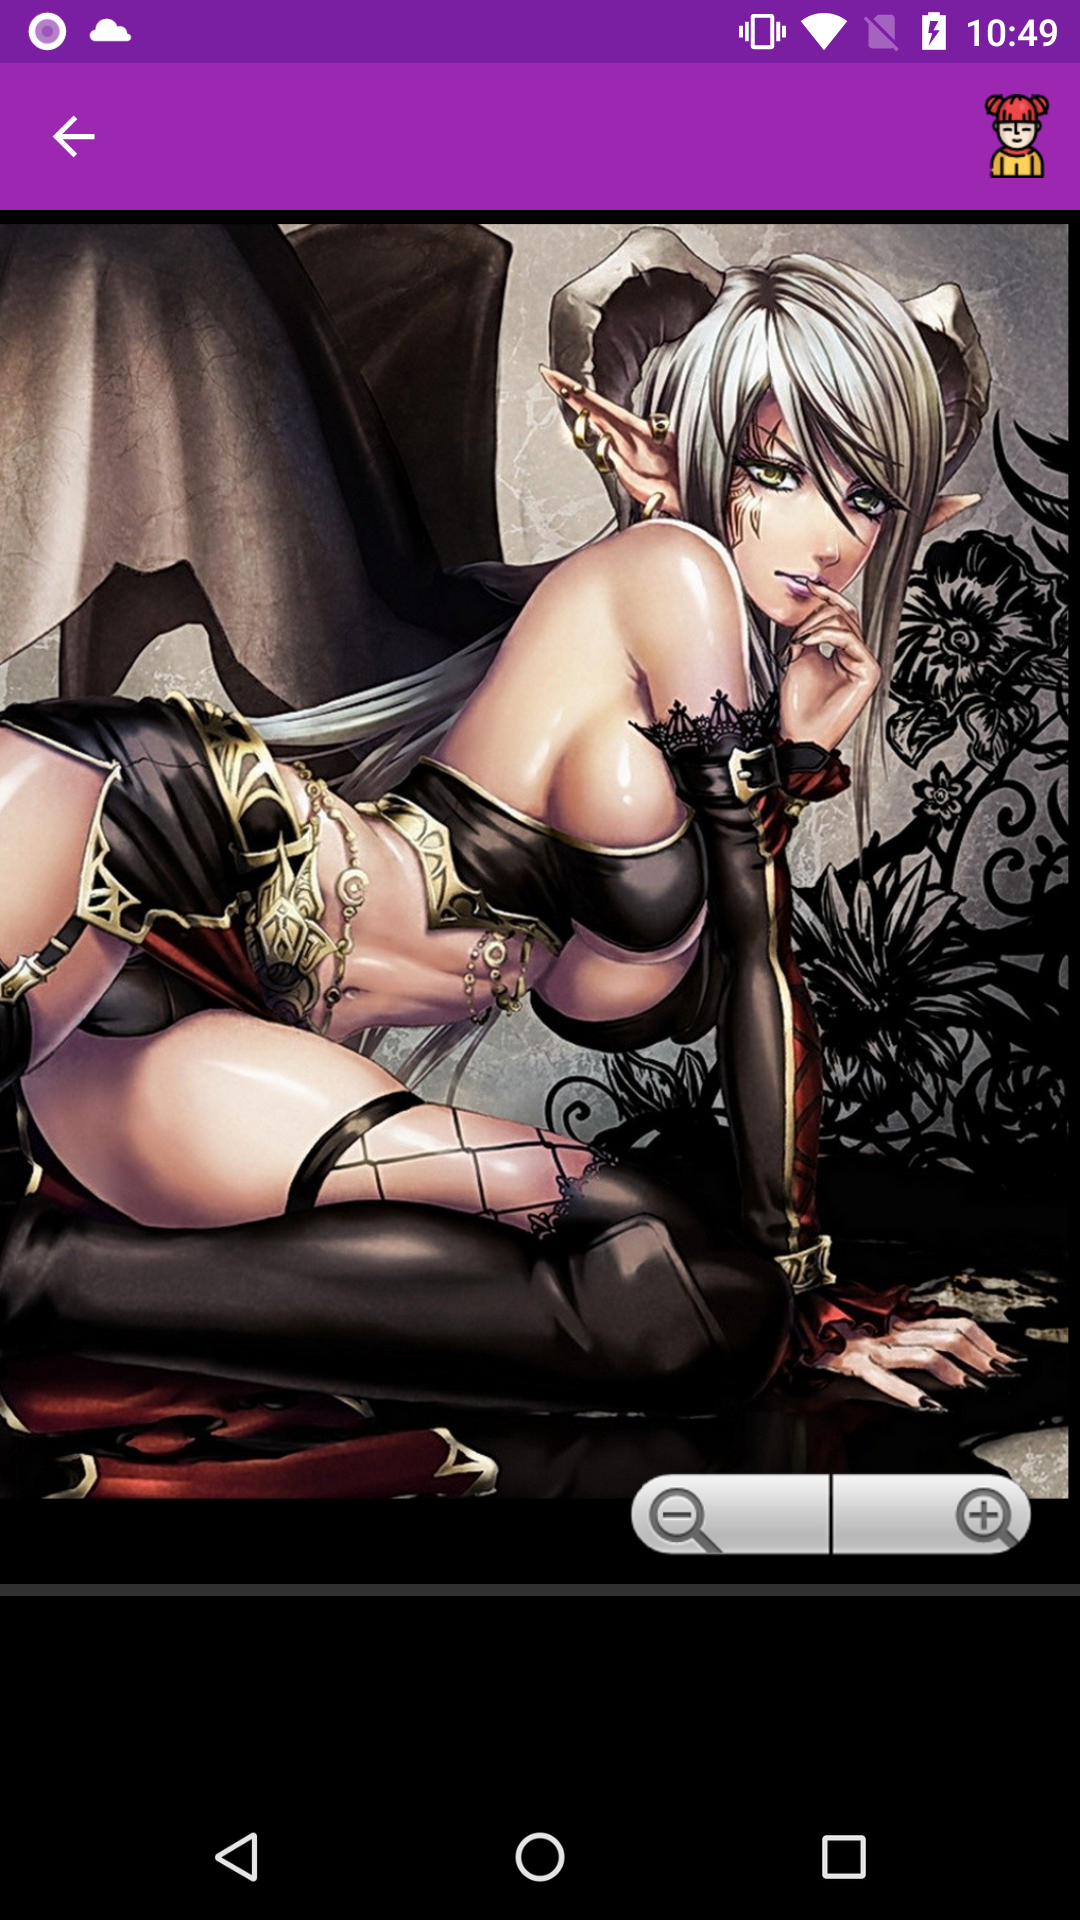 Fantasy Girls wallpapers for,collections,apps,erotic,application,galleries,fantasy,star,gomez,backgrounds,photo,sexy,hentai,images,porn,pic,wallpapers,blowbang,adult,esperanza,pegging,best,app,girls,pics,anime